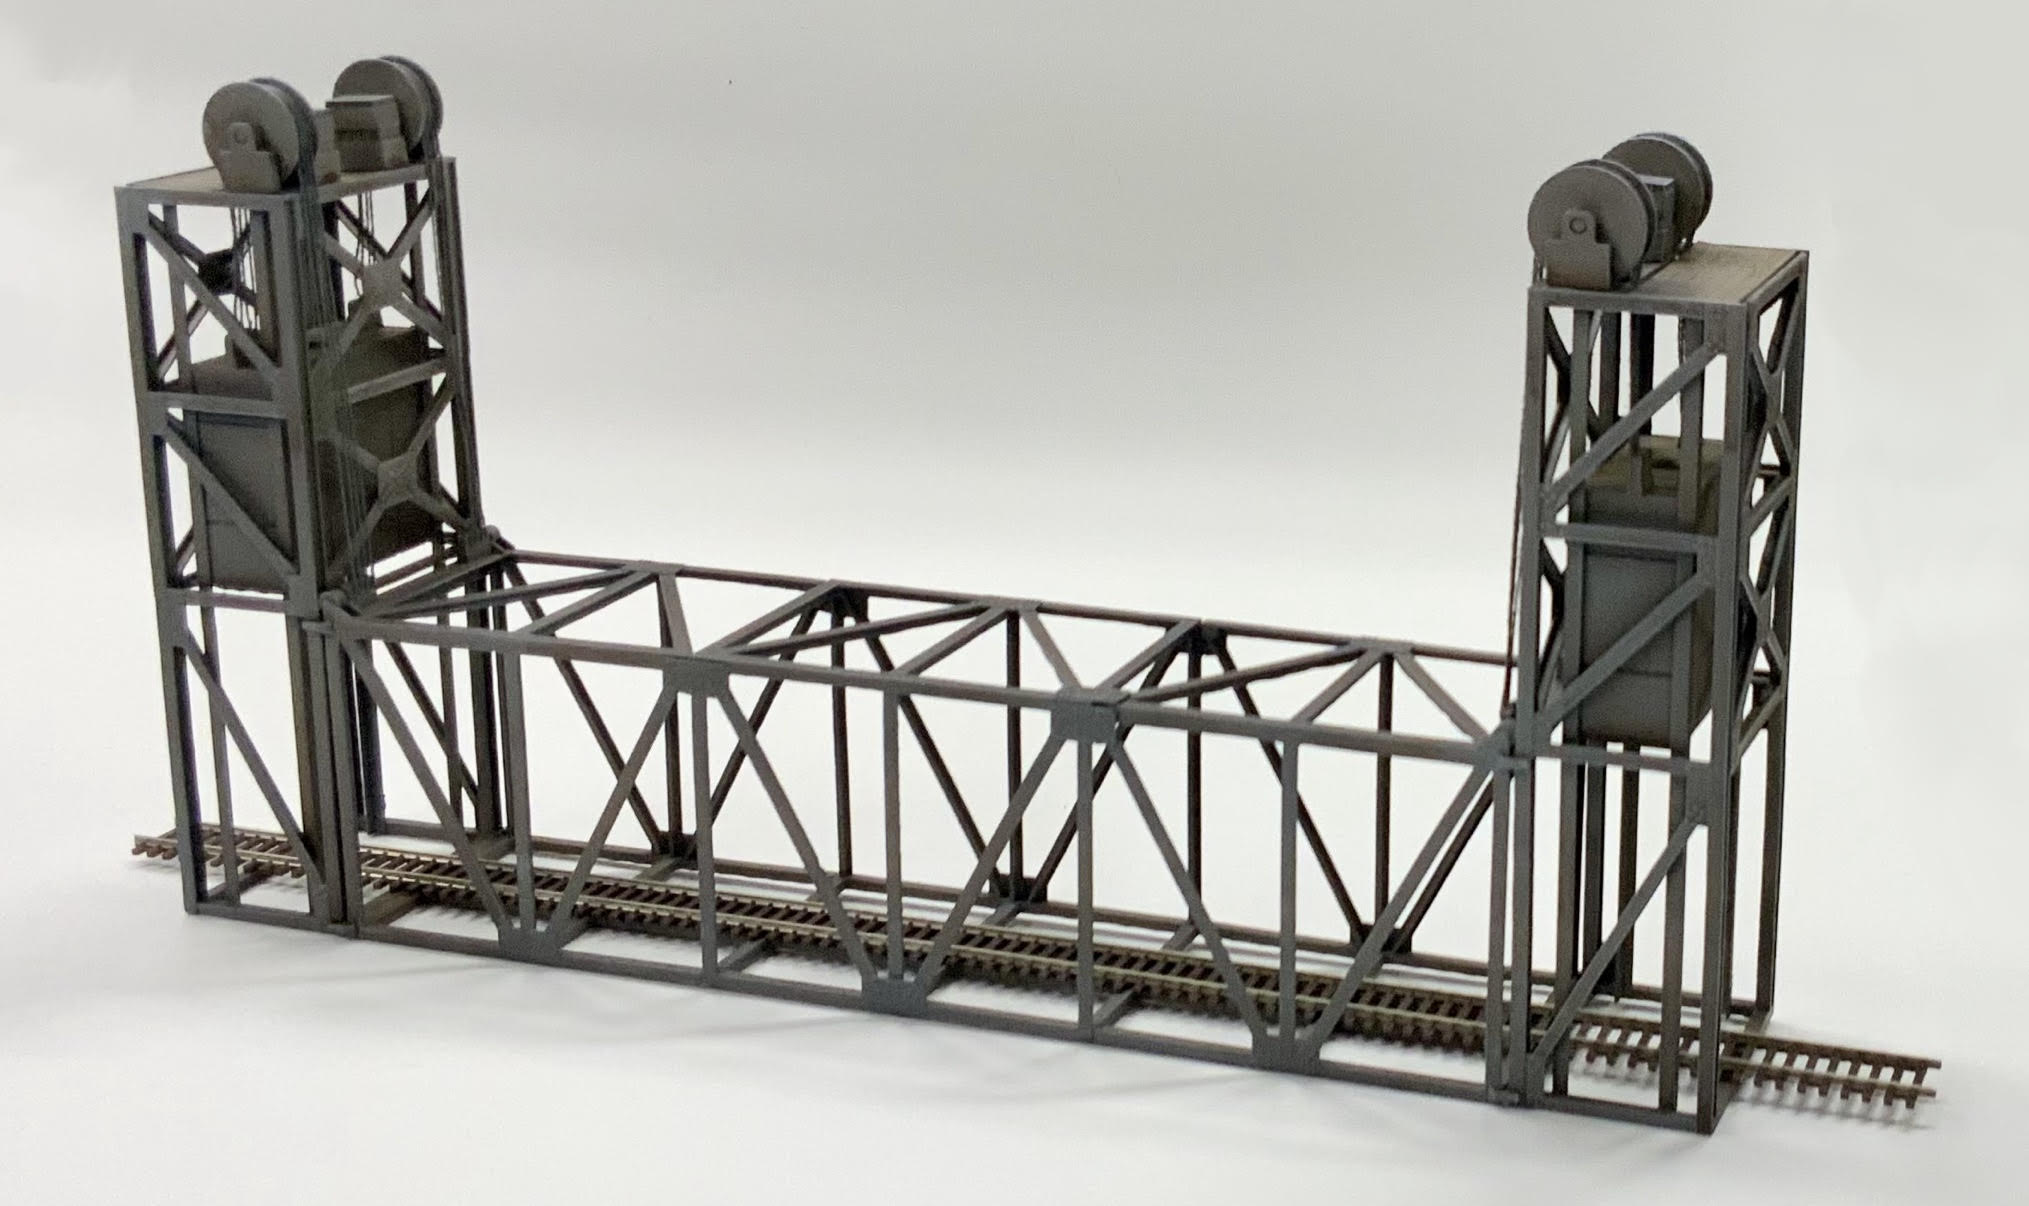 Single Track, N-Scale lift bridge with counterweights. Adjustable length.